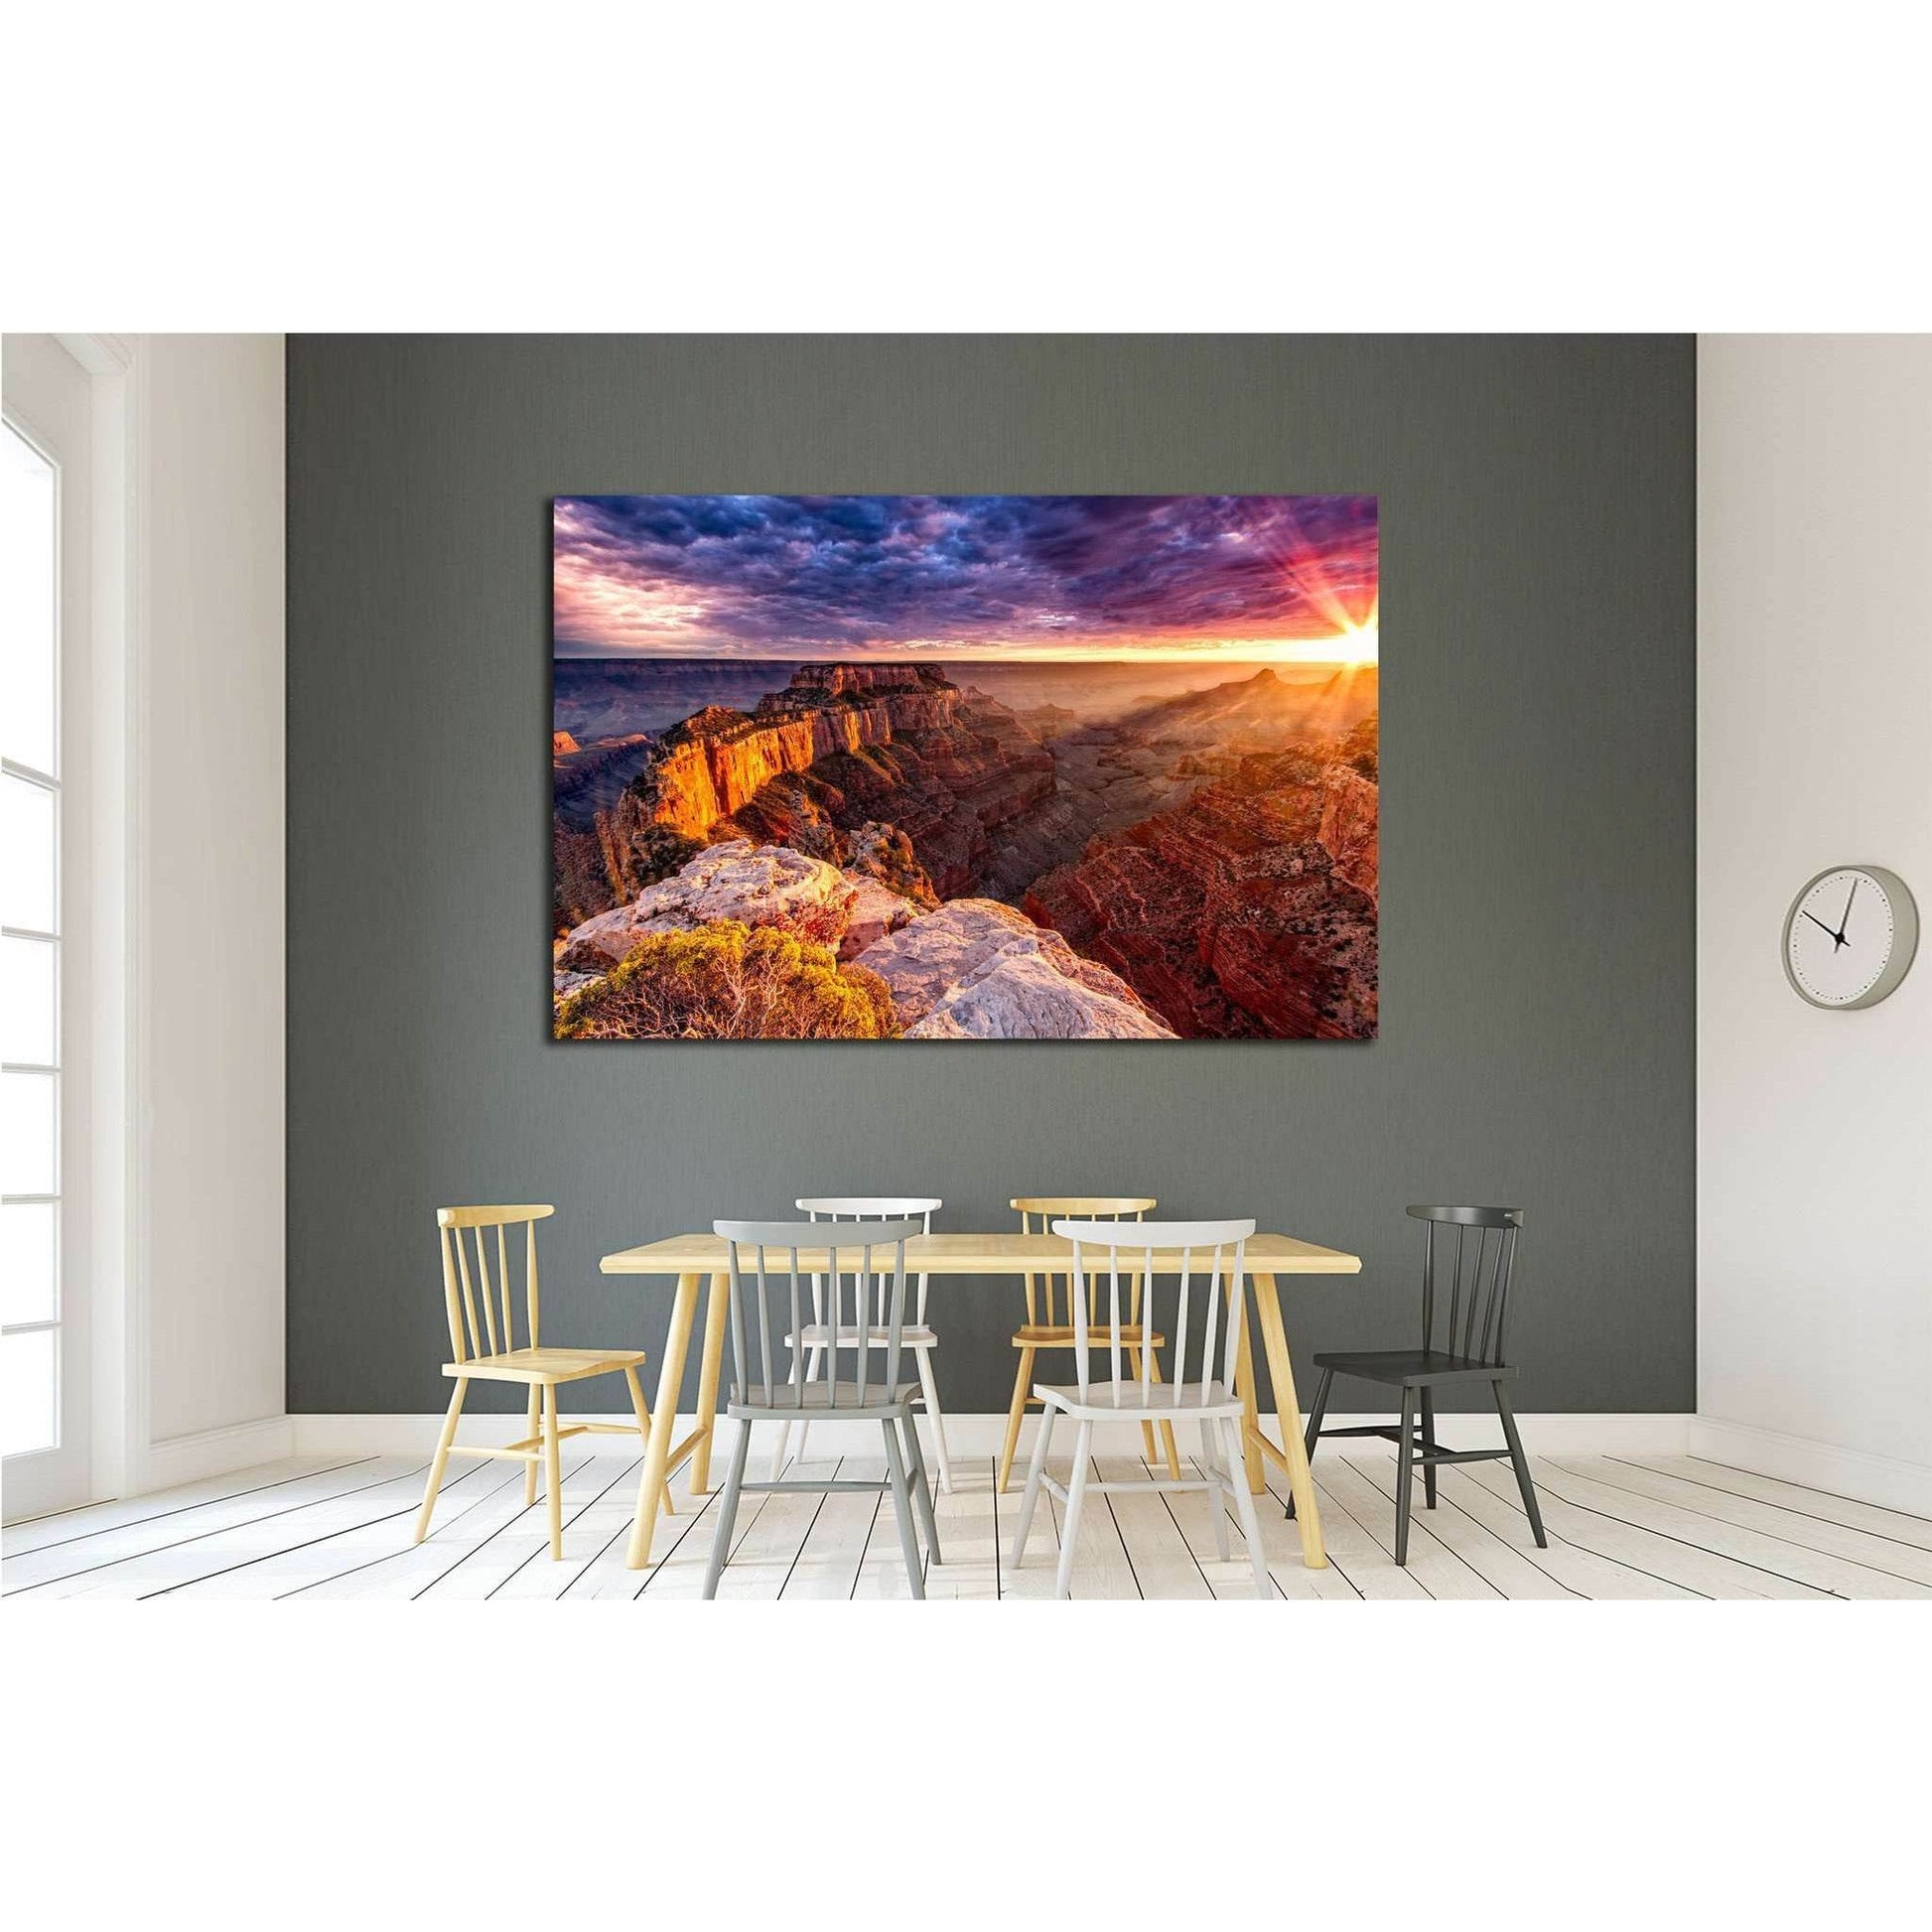 North Rim Grand Canyon Cape Royal №1962 Ready to Hang Canvas PrintThis triptych canvas print captures the breathtaking beauty of the North Rim of the Grand Canyon from Cape Royal at sunrise. The warm sunlight bathes the intricate rock formations in a gold